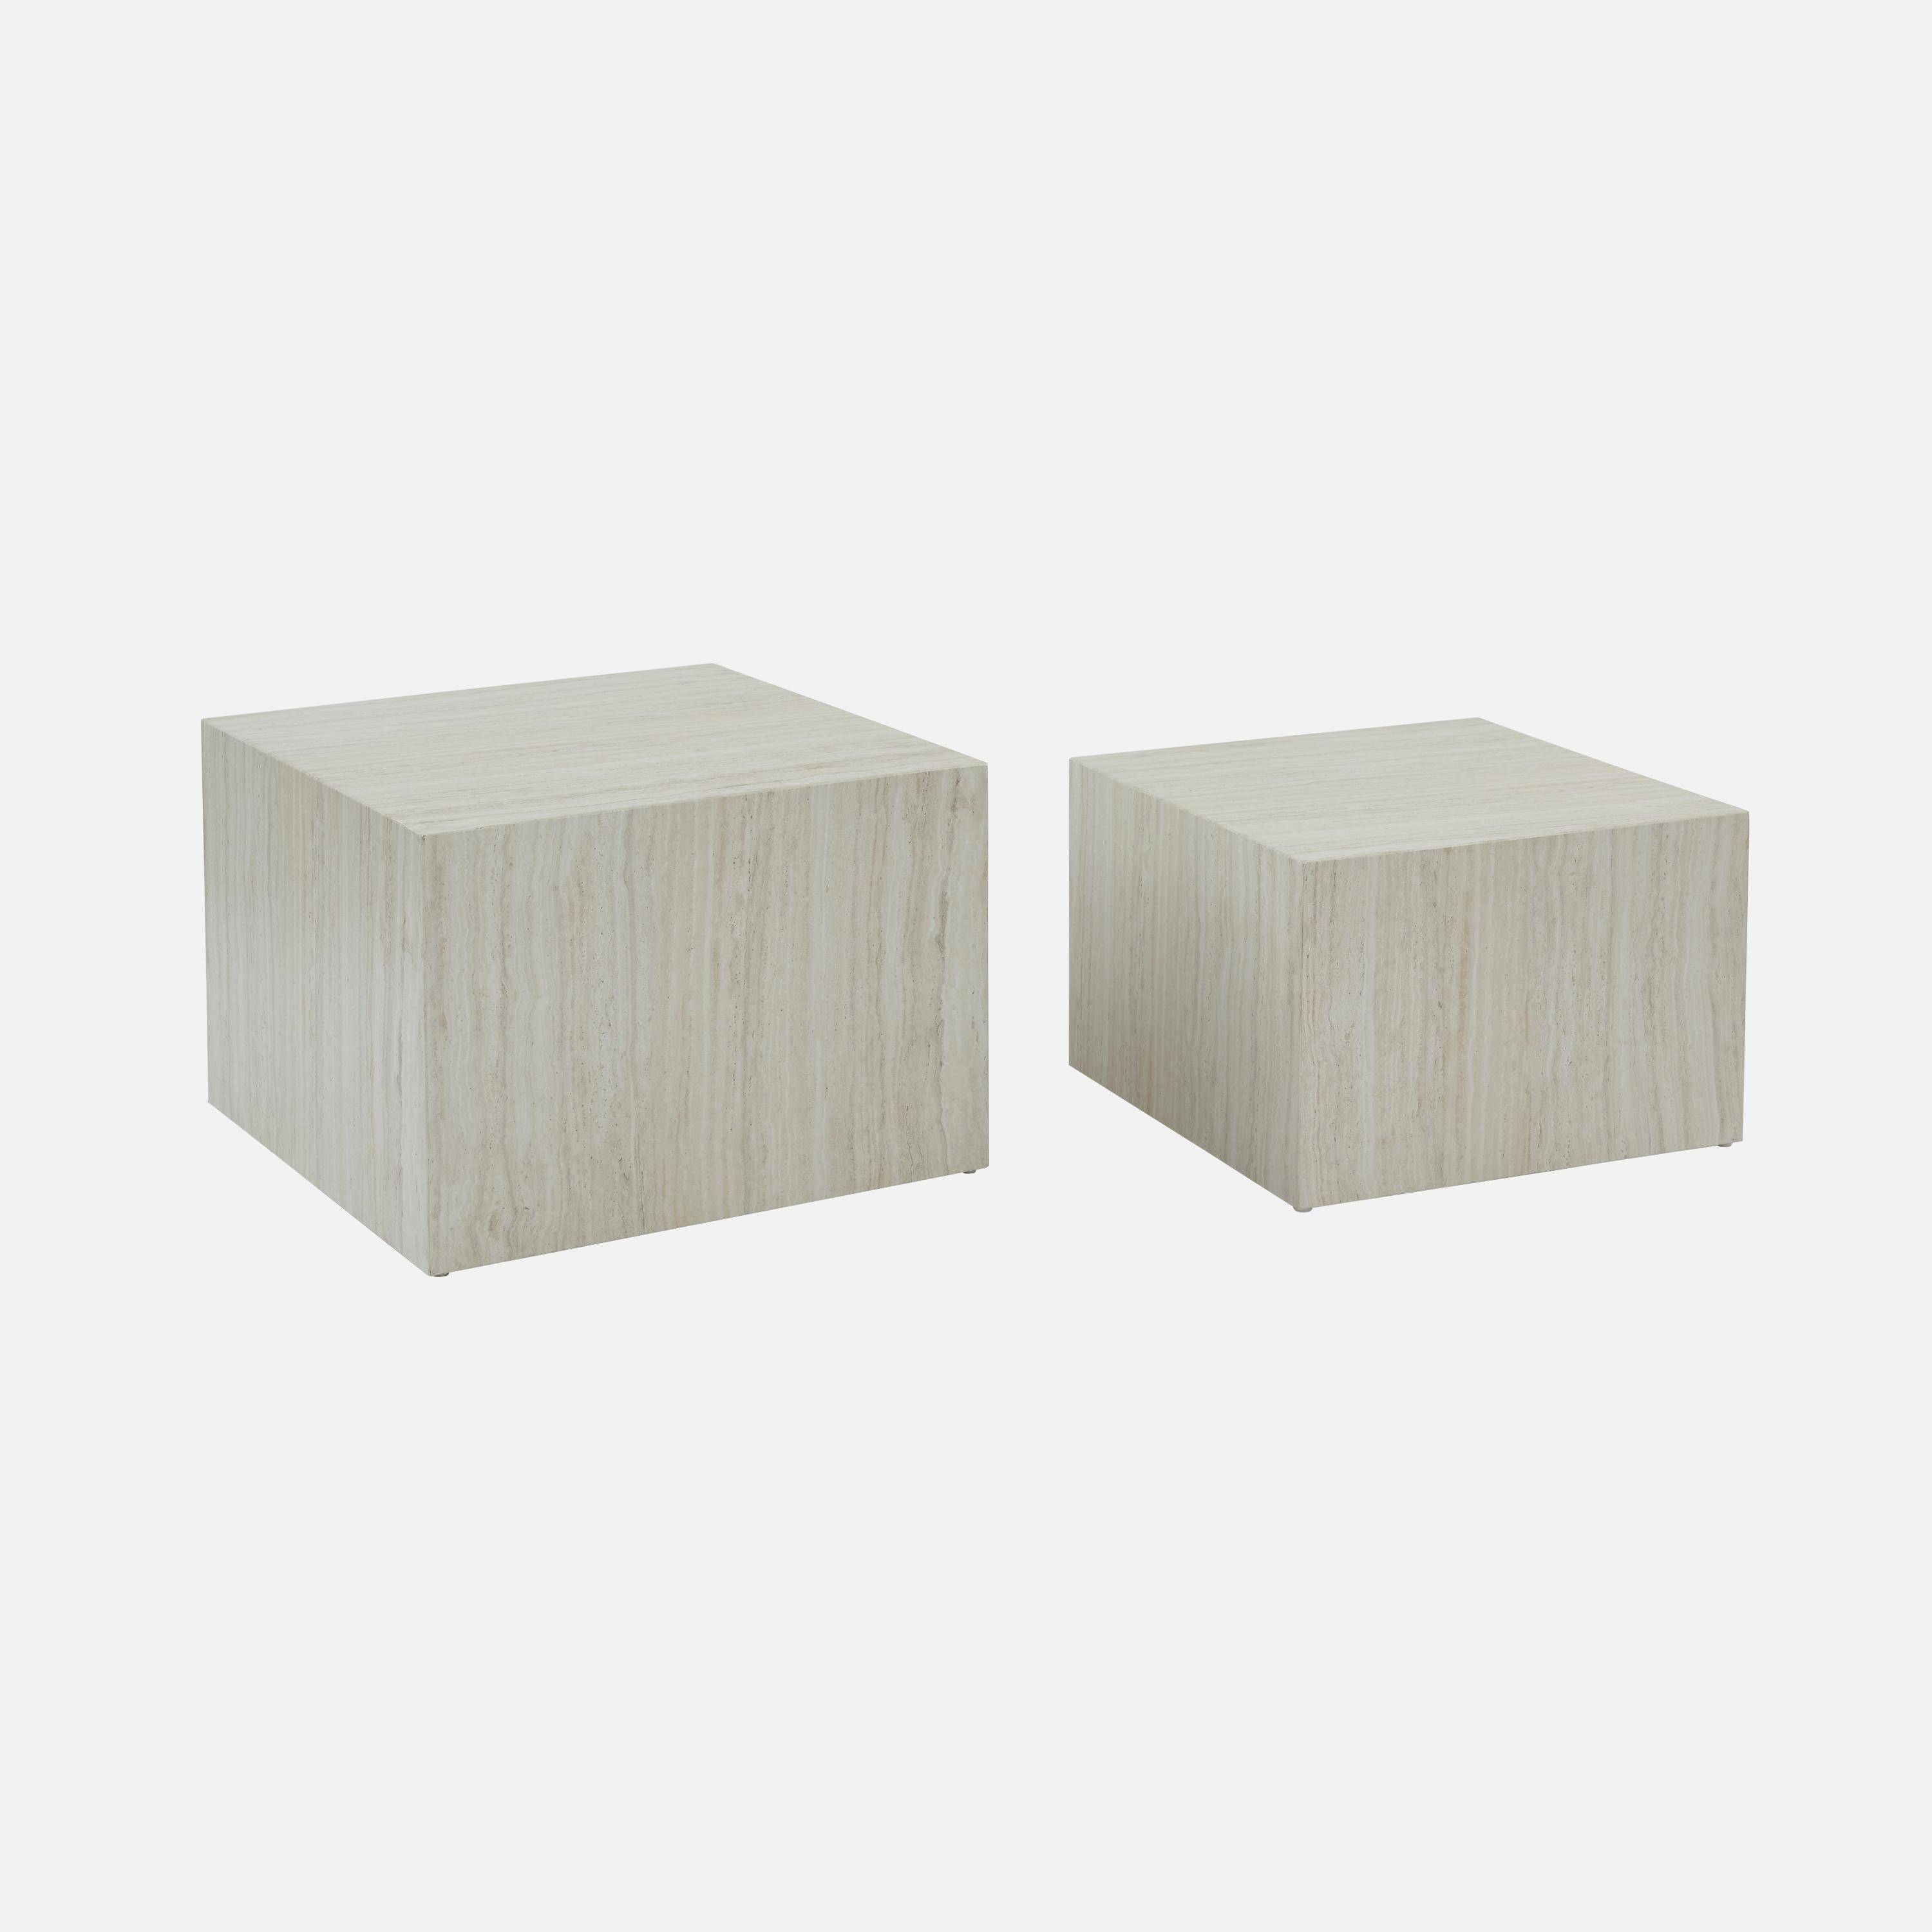 Set of 2 square coffee tables with marble effect, white, L50xW50xH33cm &  L58xW58xH40cm, Paros,sweeek,Photo5